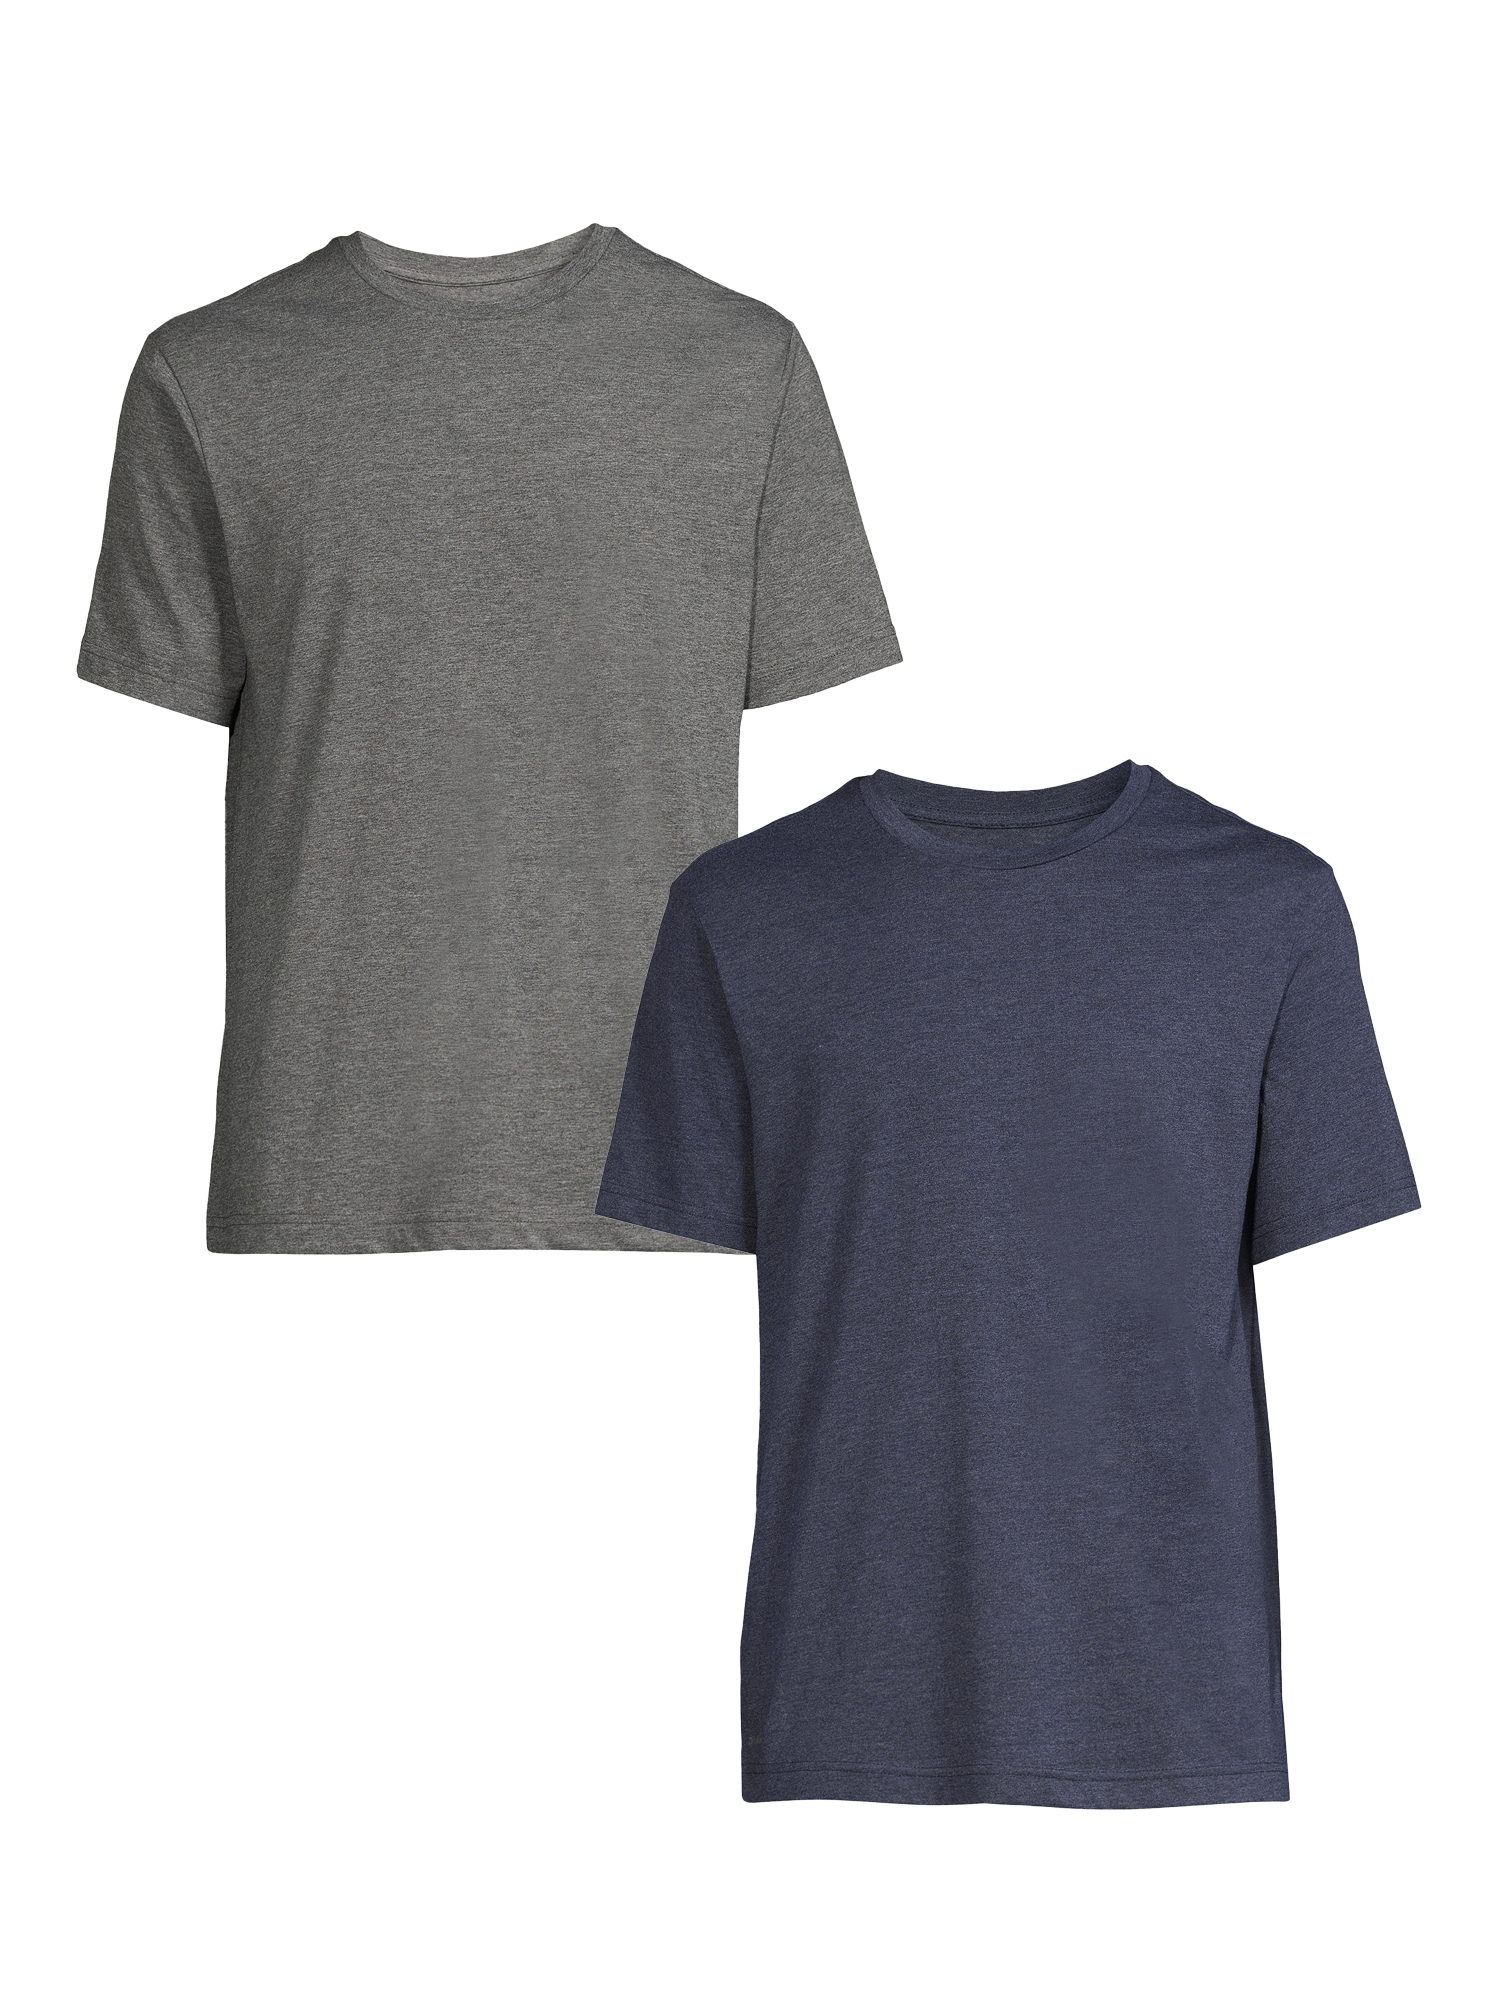 Athletic Works Men's and Big Men's Active Tri-Blend Tee, 2-Pack, Sizes up to 5XL - image 1 of 5